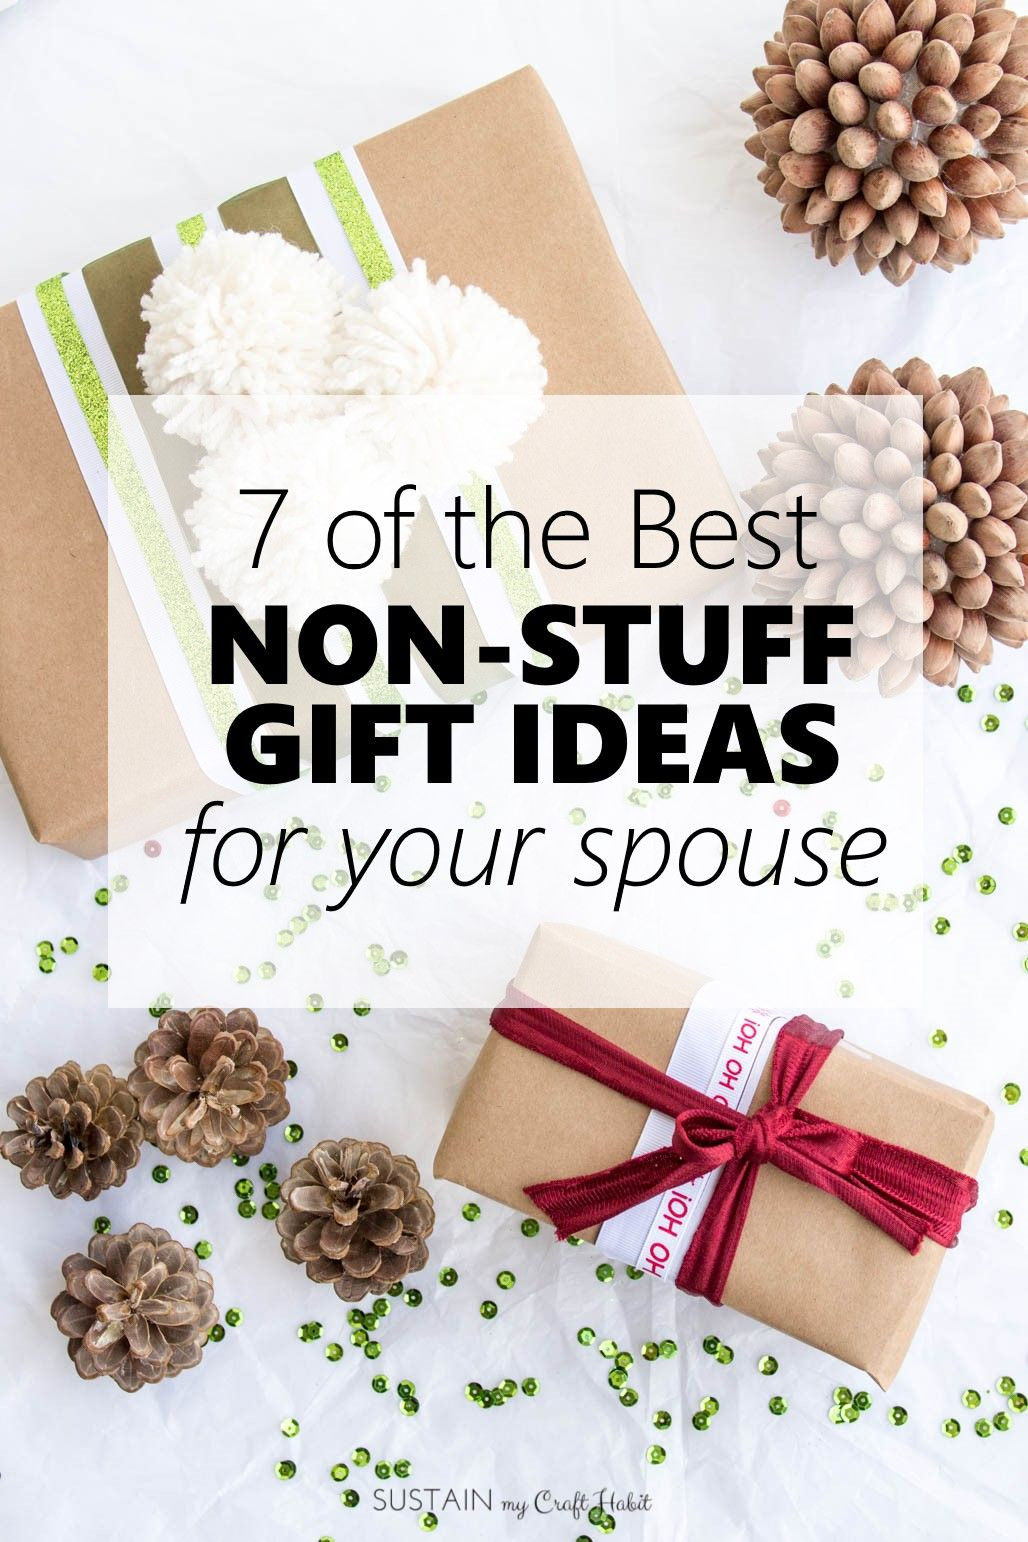 Holiday Gift Ideas Husband
 7 of the Best Non Stuff Gift Ideas for your Spouse